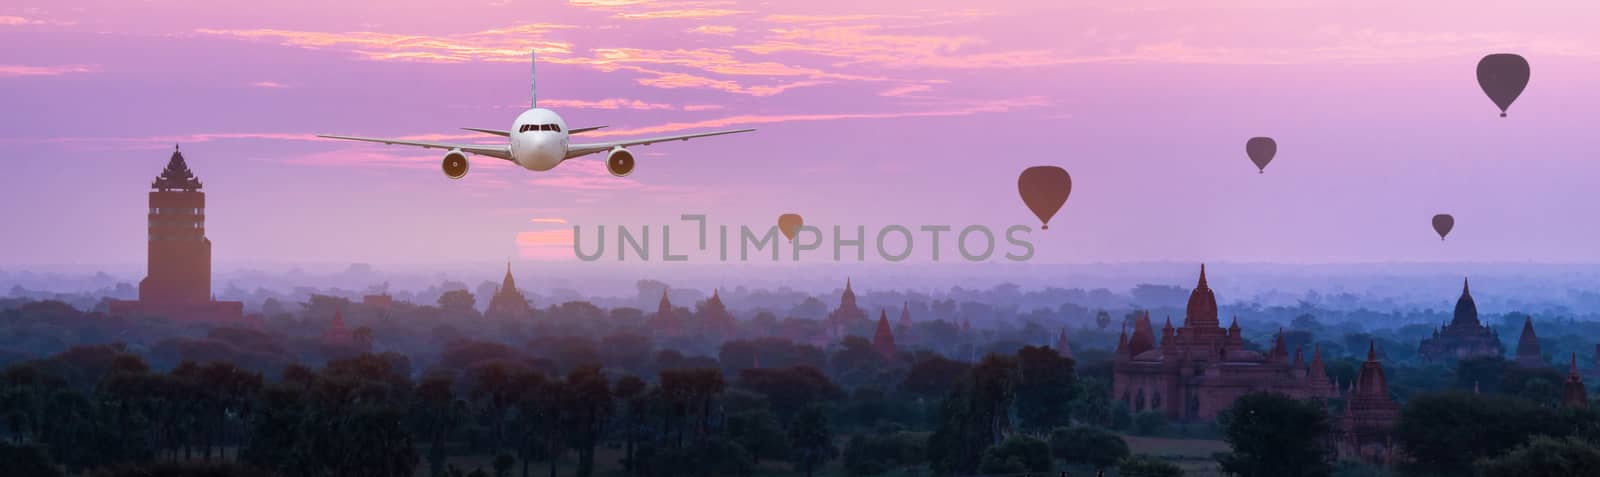 Front of real plane aircraft, on Pagoda Sunset in Bagan,Myanmar background